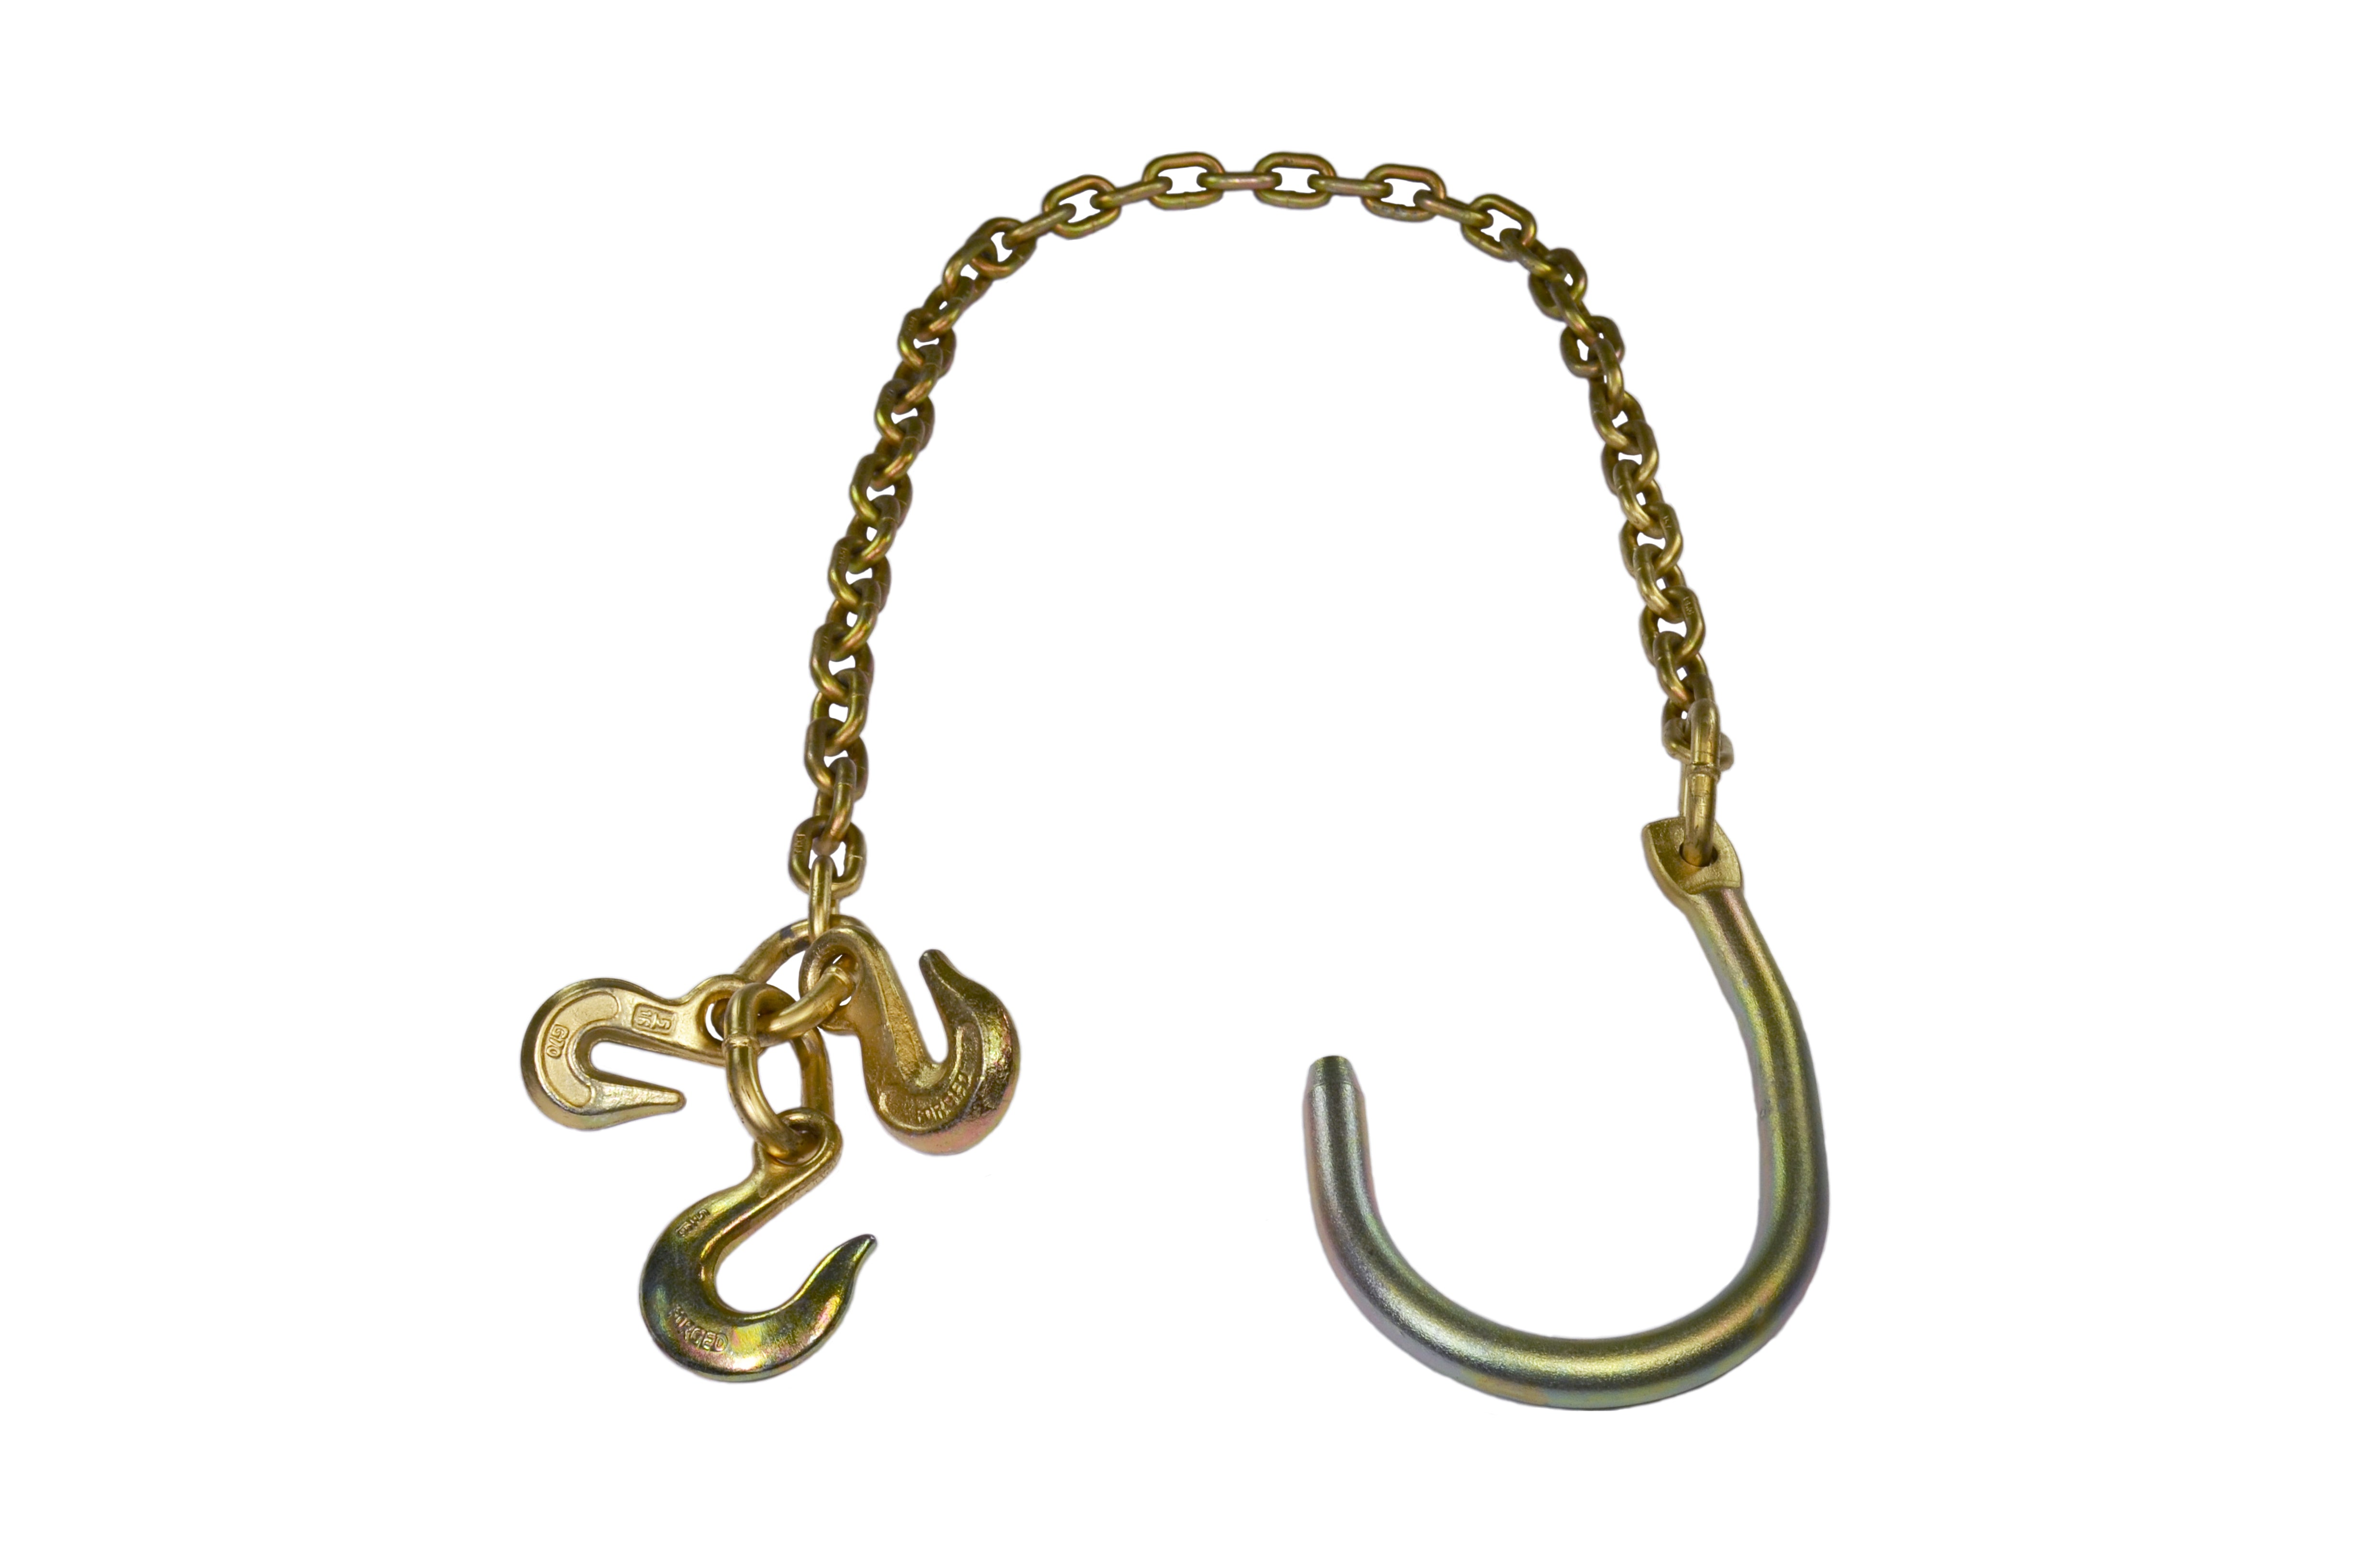 Tow Chain with J Hook and Grab Hook G70 Forged Towing Bridle Towing Chain  with Rigging Hooks - China Chain, Tow Chain